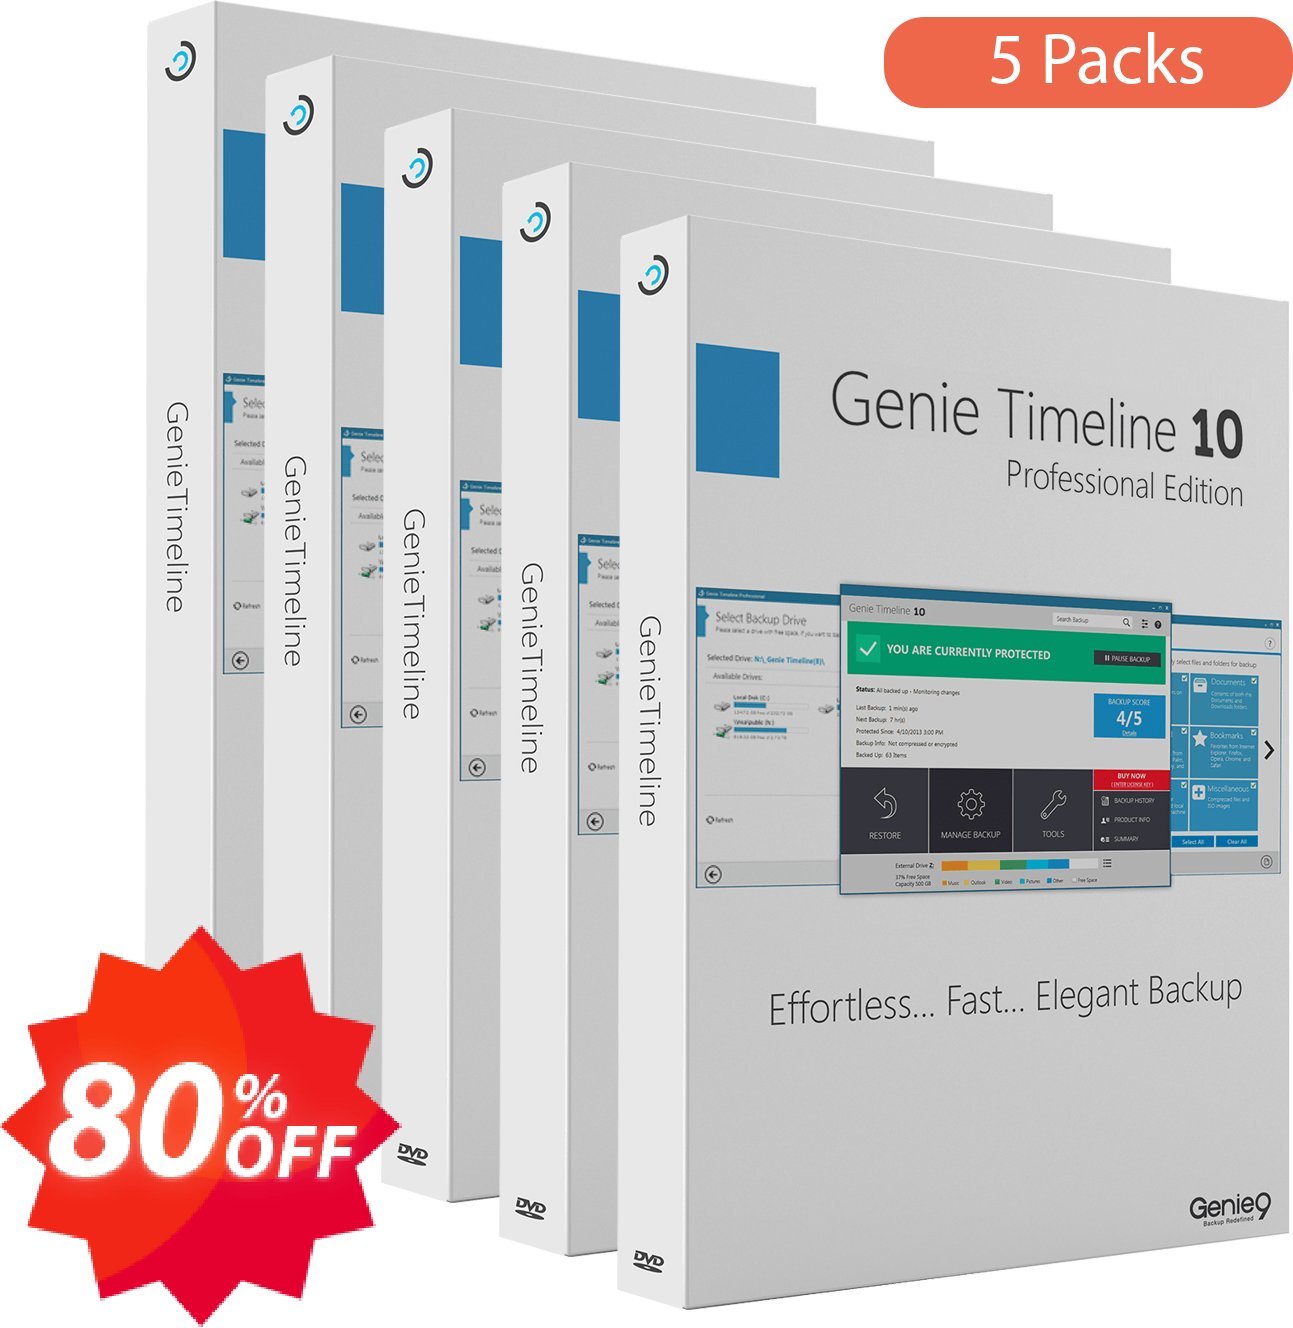 Genie Timeline Pro 10, 5 Pack  Coupon code 80% discount 